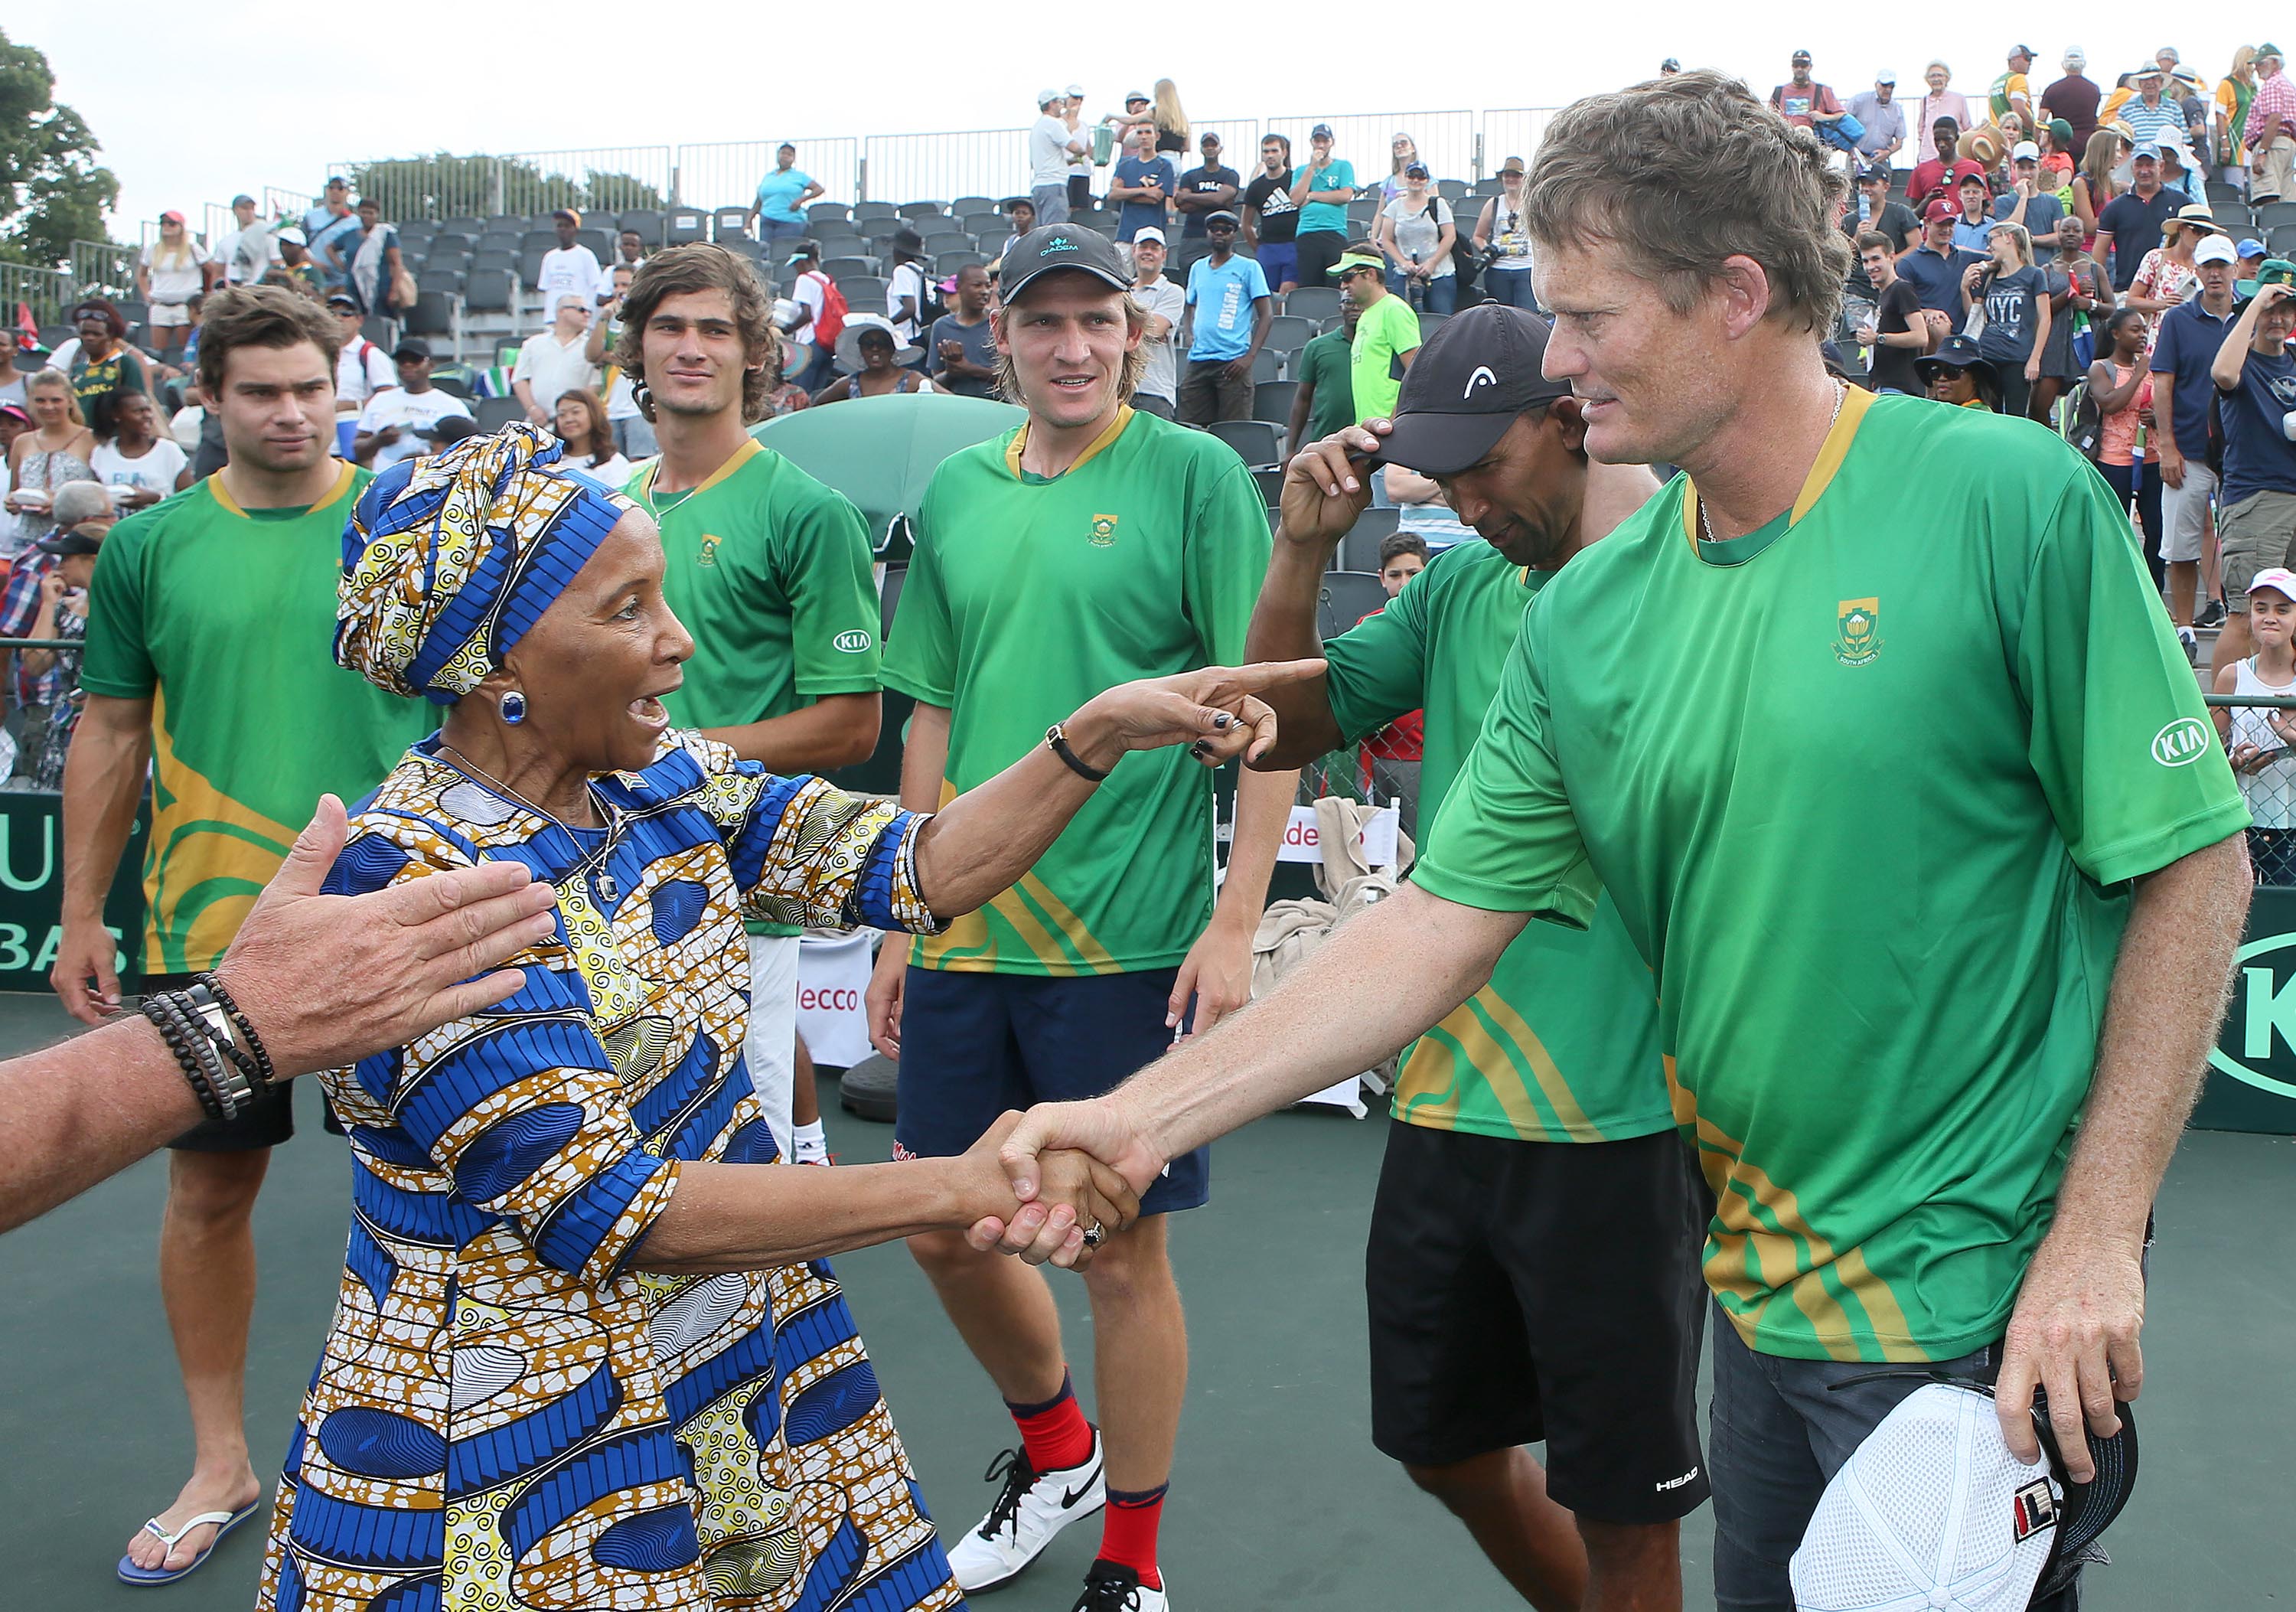 Former First Lady, Zanele Mbeki recognises Wayne Ferreira when she was introduced to the South African team after the reverse singles of the Davis Cup tie between South Africa and Estonia at the Irene Country Club on February 05 2017 in Pretoria, South Africa.